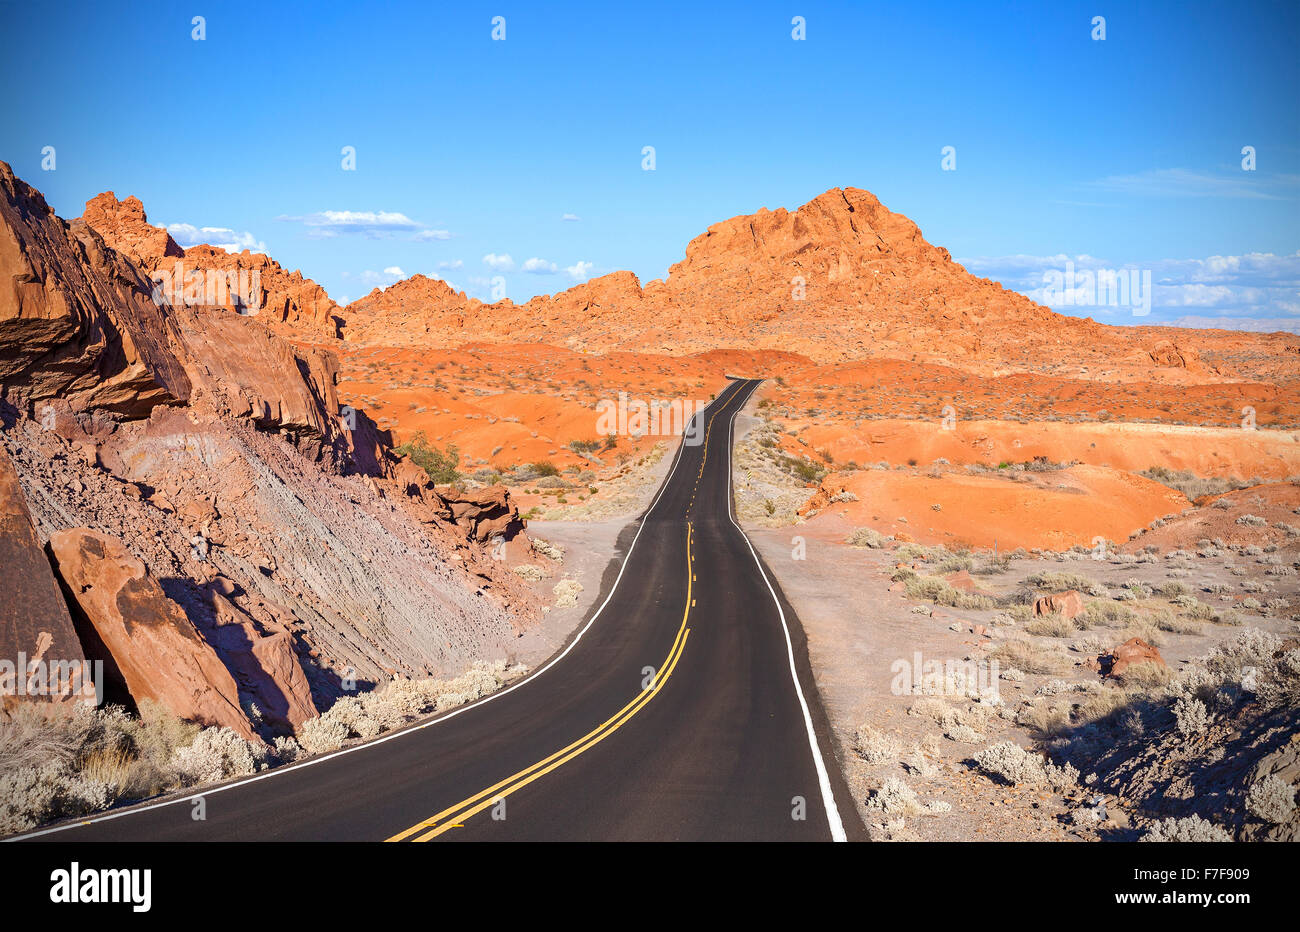 Winding desert highway, travel adventure concept, Valley of Fire State Park, Nevada, USA. Stock Photo